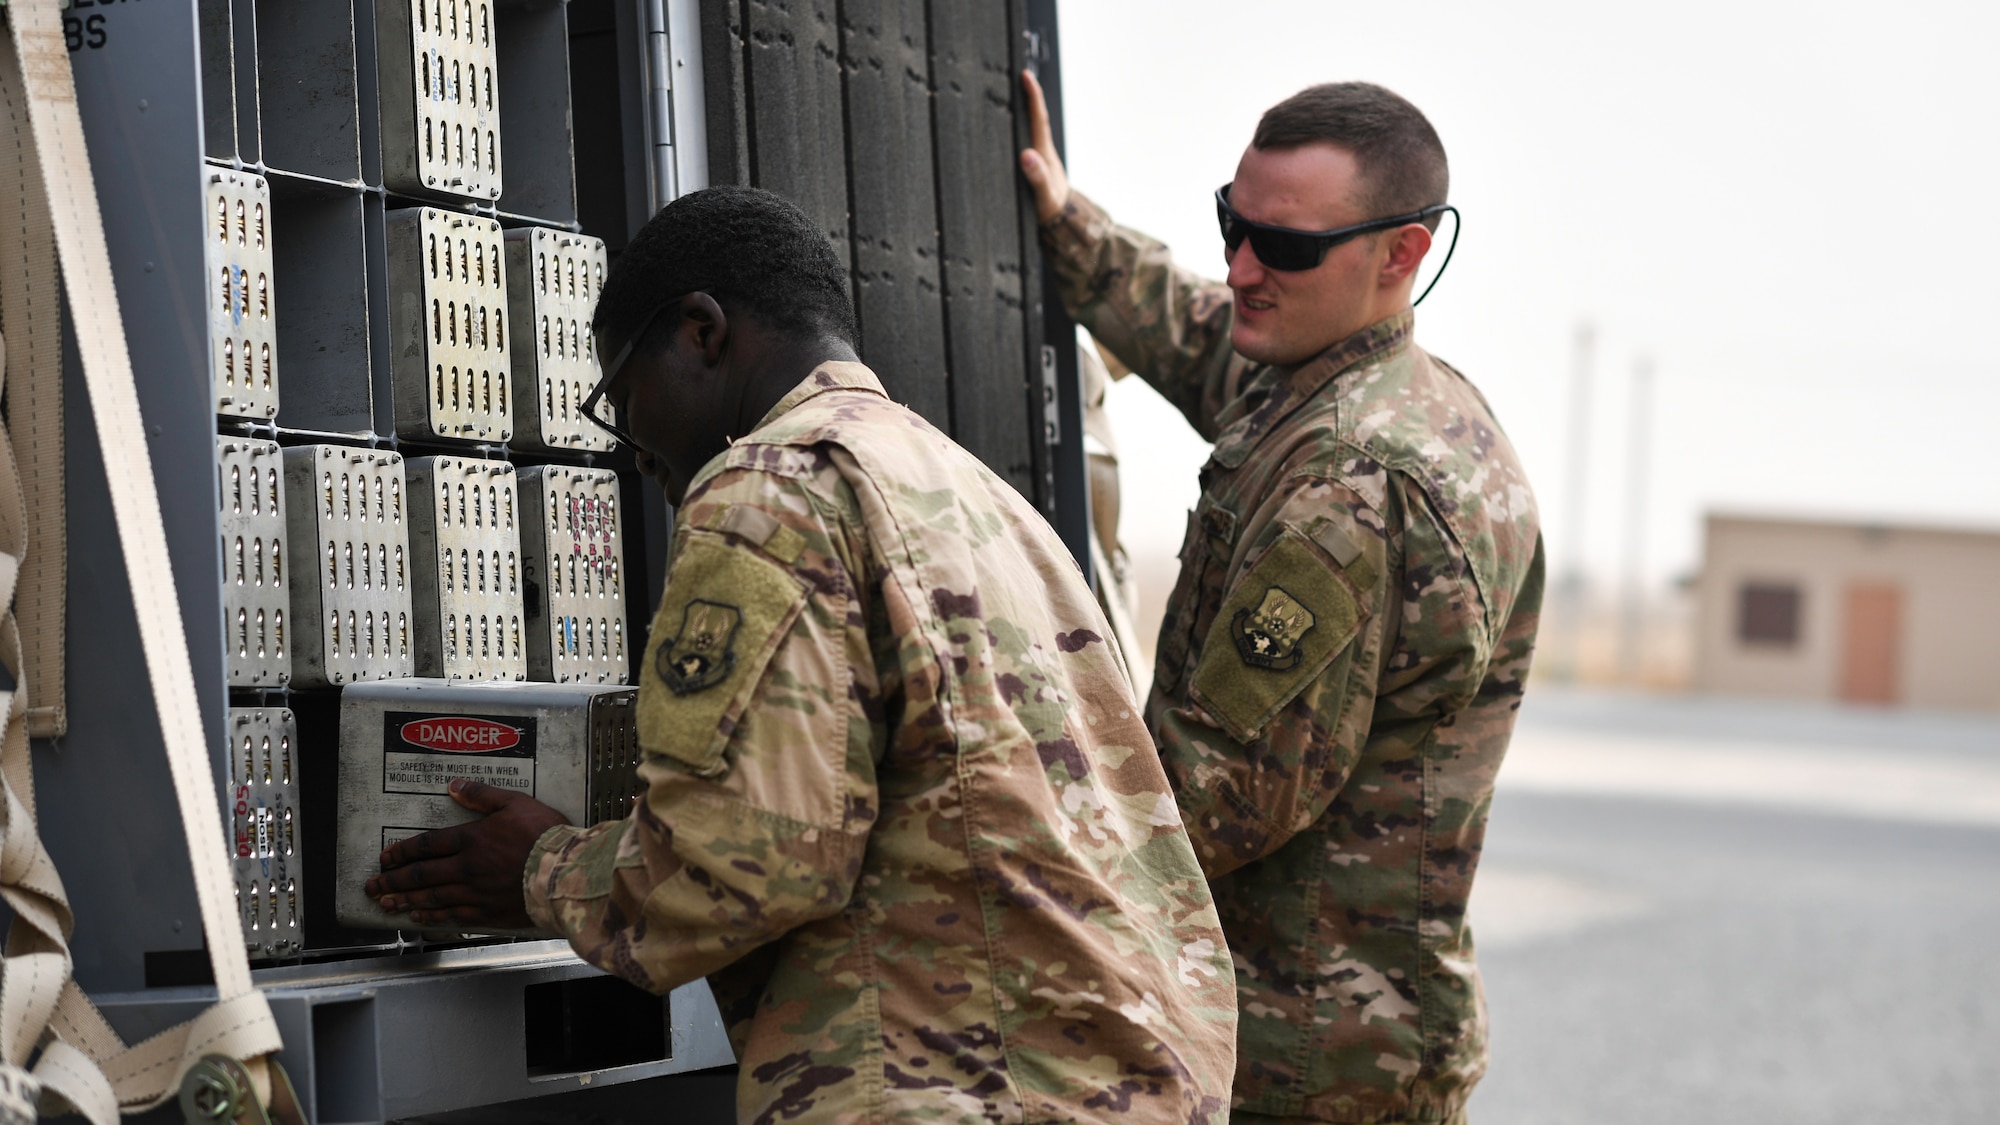 U.S. Air Force Senior Airmen Samson Lawanson and Reid Edmonds, 386th Expeditionary Maintenance Squadron munitions technician journeymen, store a flare housing module into a transportation trailer at Ali Al Salem Air Base, Kuwait, July 18, 2019. Transportation trailers are used to store units after they are inspected and repackaged before delivery to the aircraft. (U.S. Air Force photo by Staff. Sgt. Mozer O. Da Cunha)